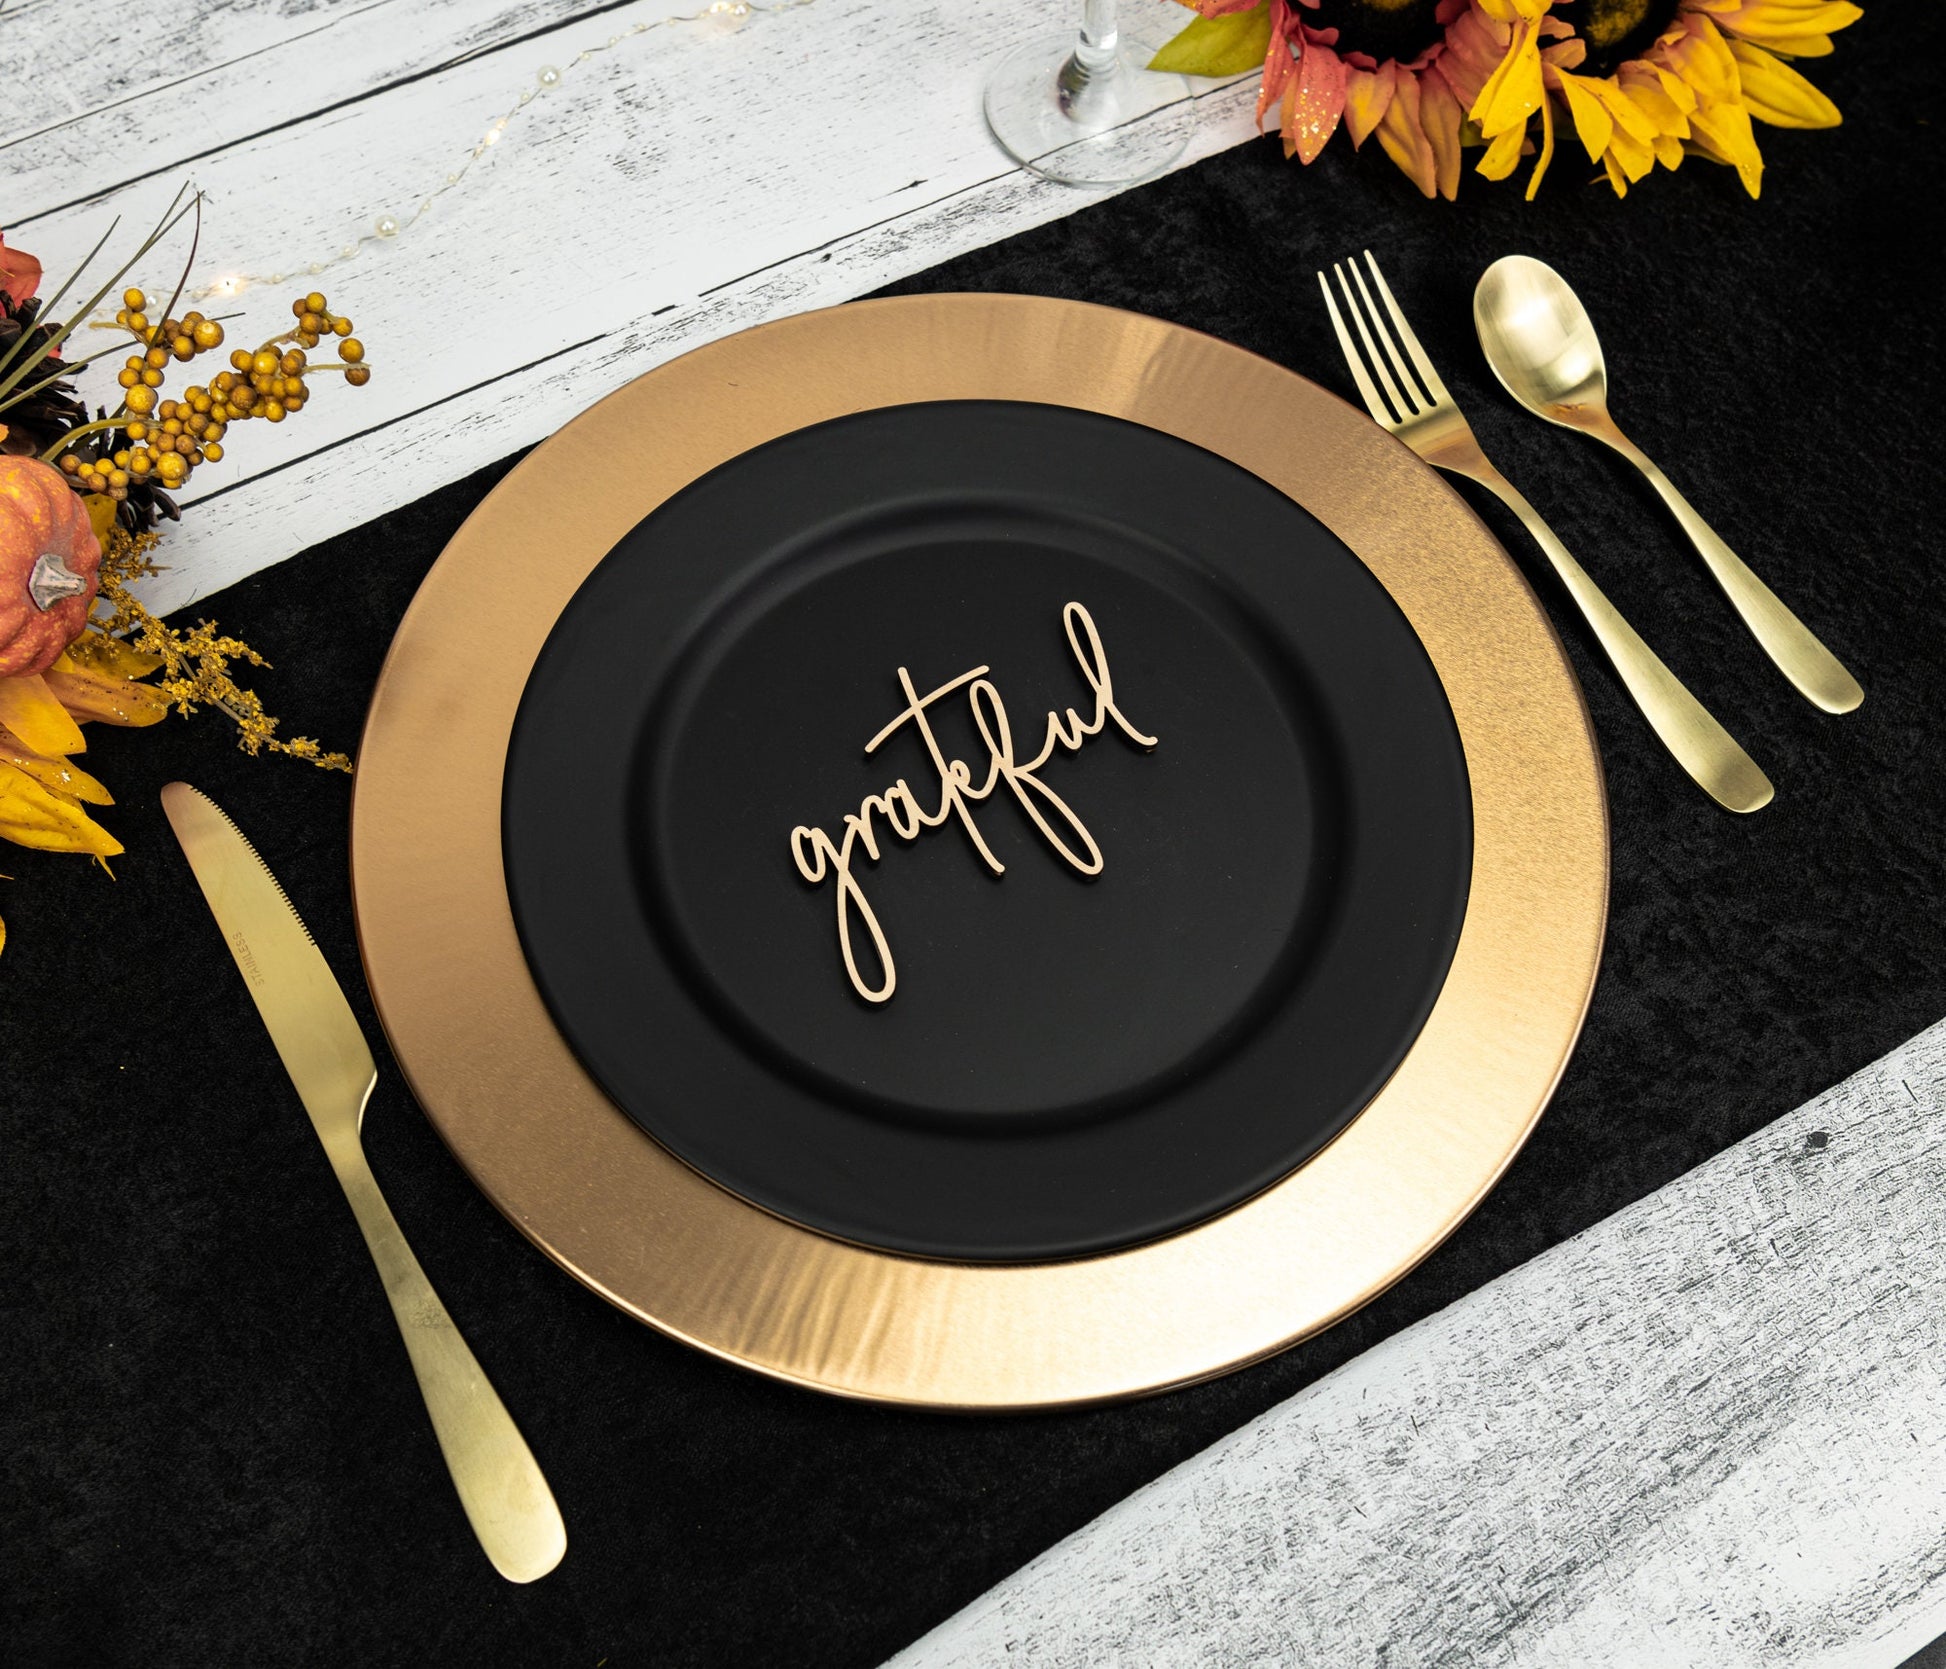 Grateful Place Cards, Thanksgiving Table Plate Settings, Grateful Wood Word, Holiday Decor, Thanksgiving Place settings, Small Grateful Sign